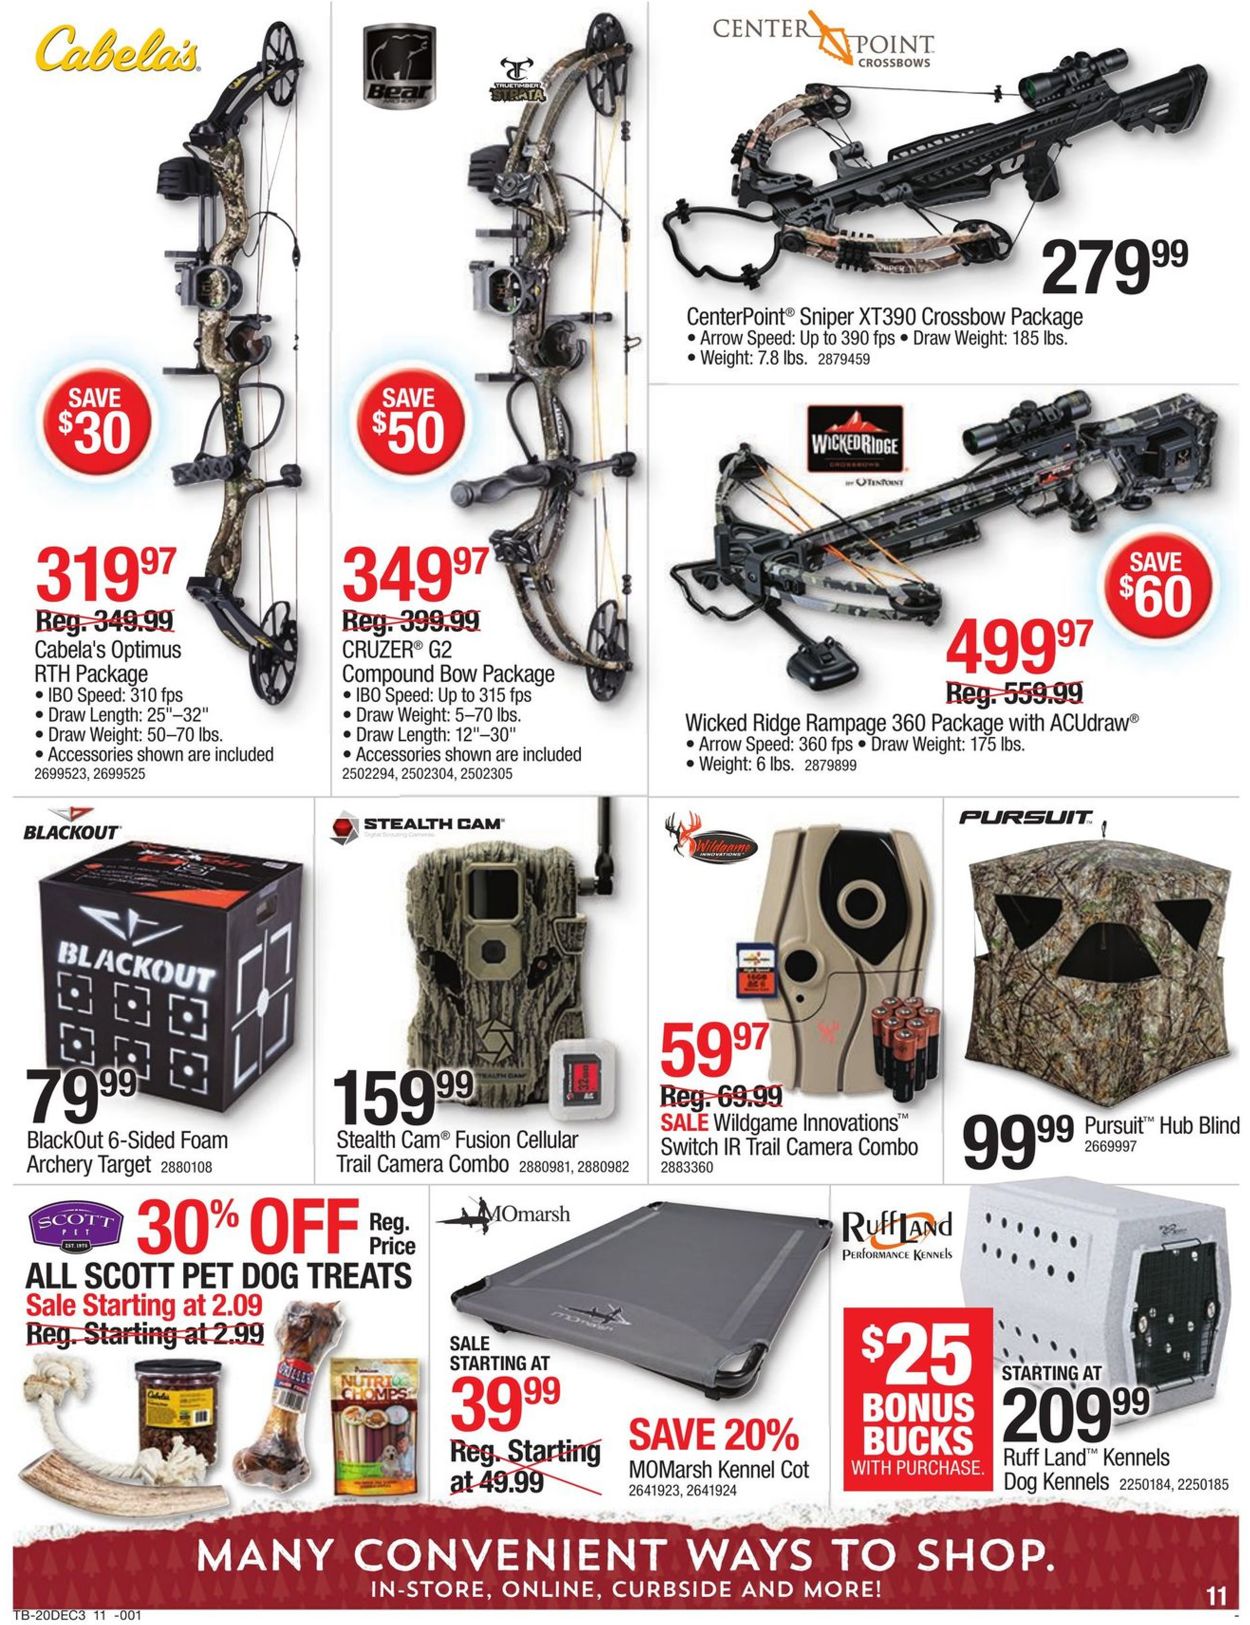 Cabela's Holiday Gift Guide 2020 Weekly Ad Circular - valid 12/17-12/24/2020 (Page 11)